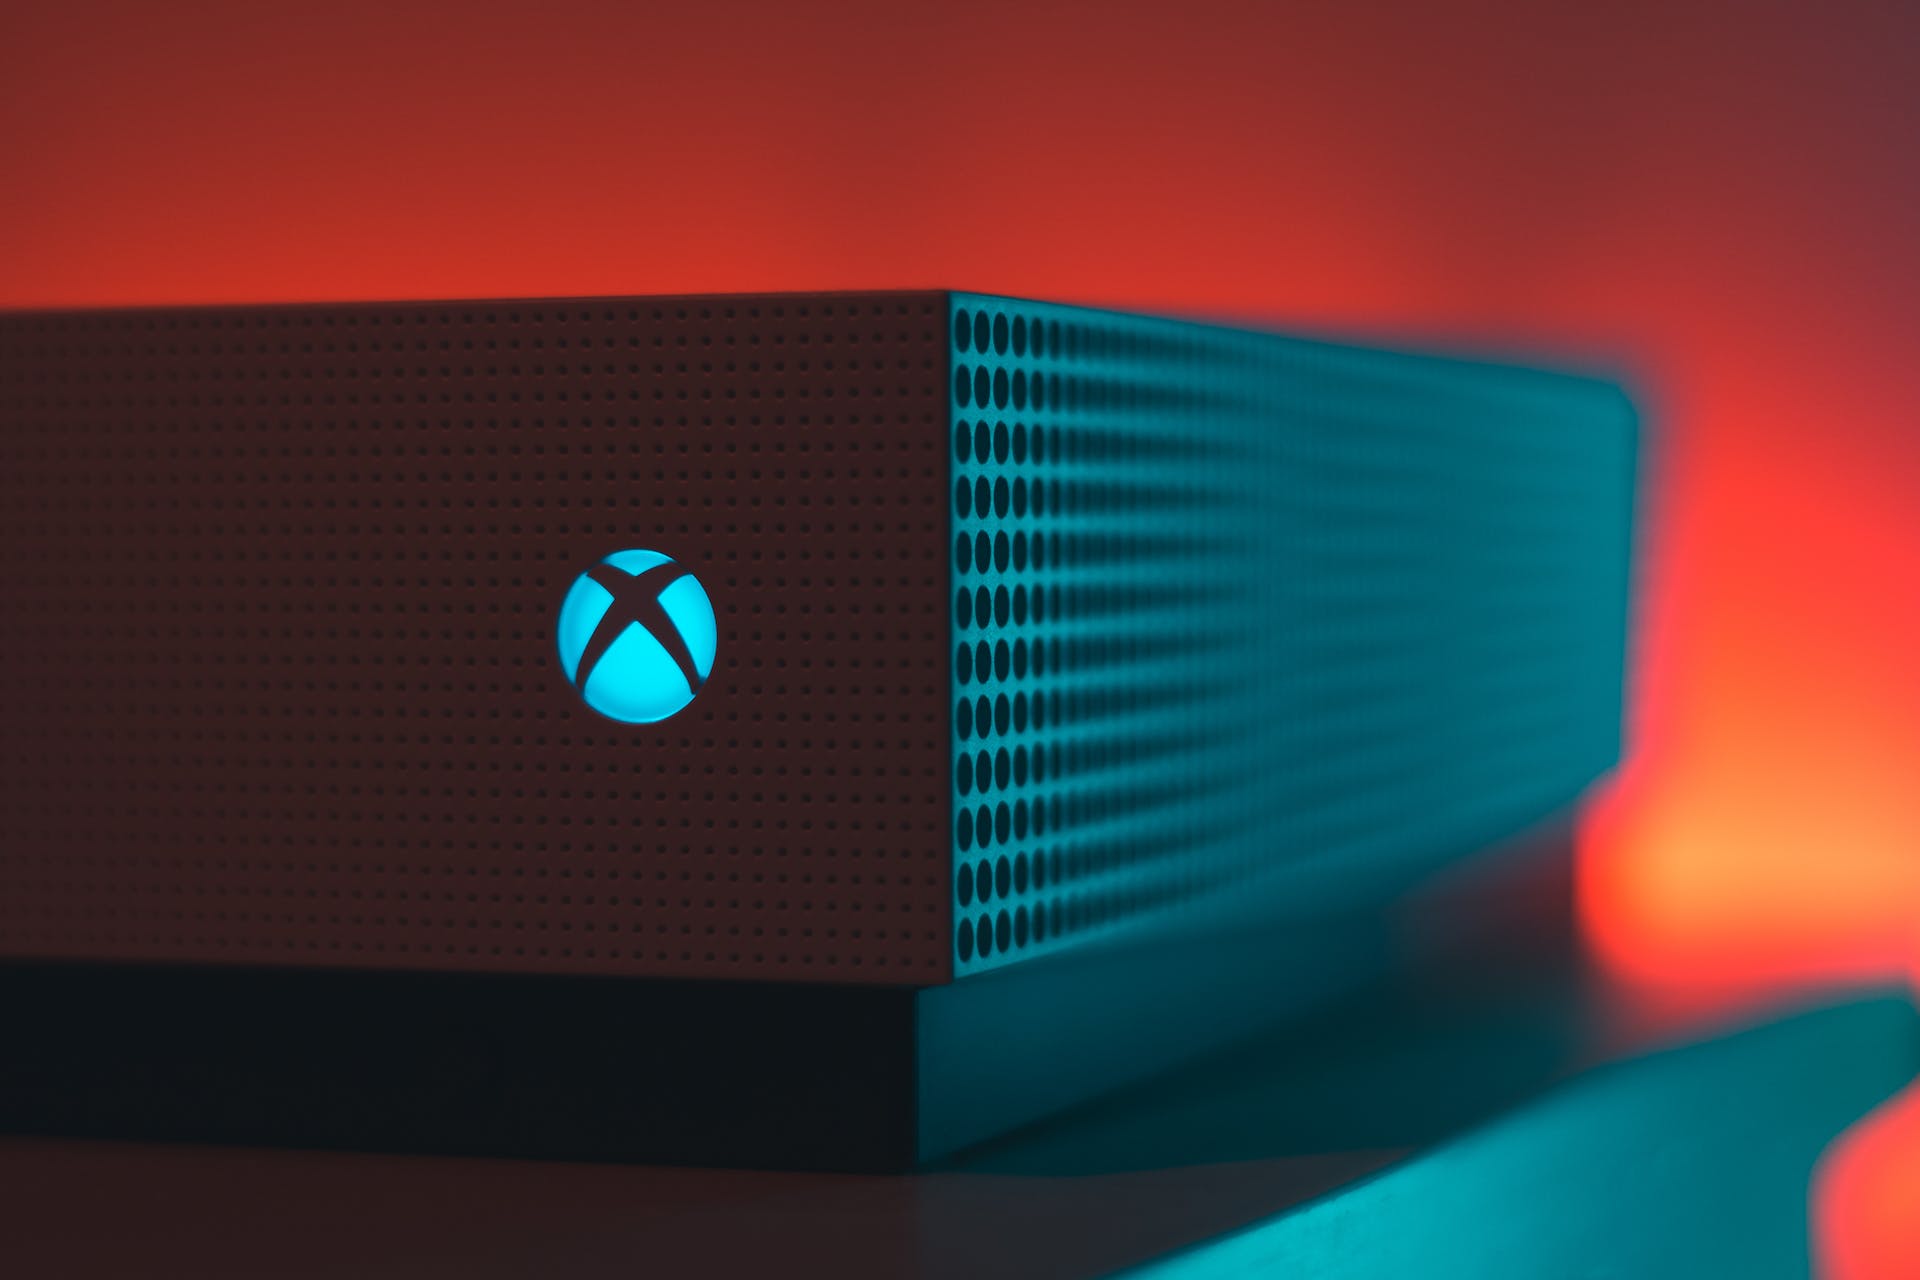 An Xbox One console | Source: Pexels